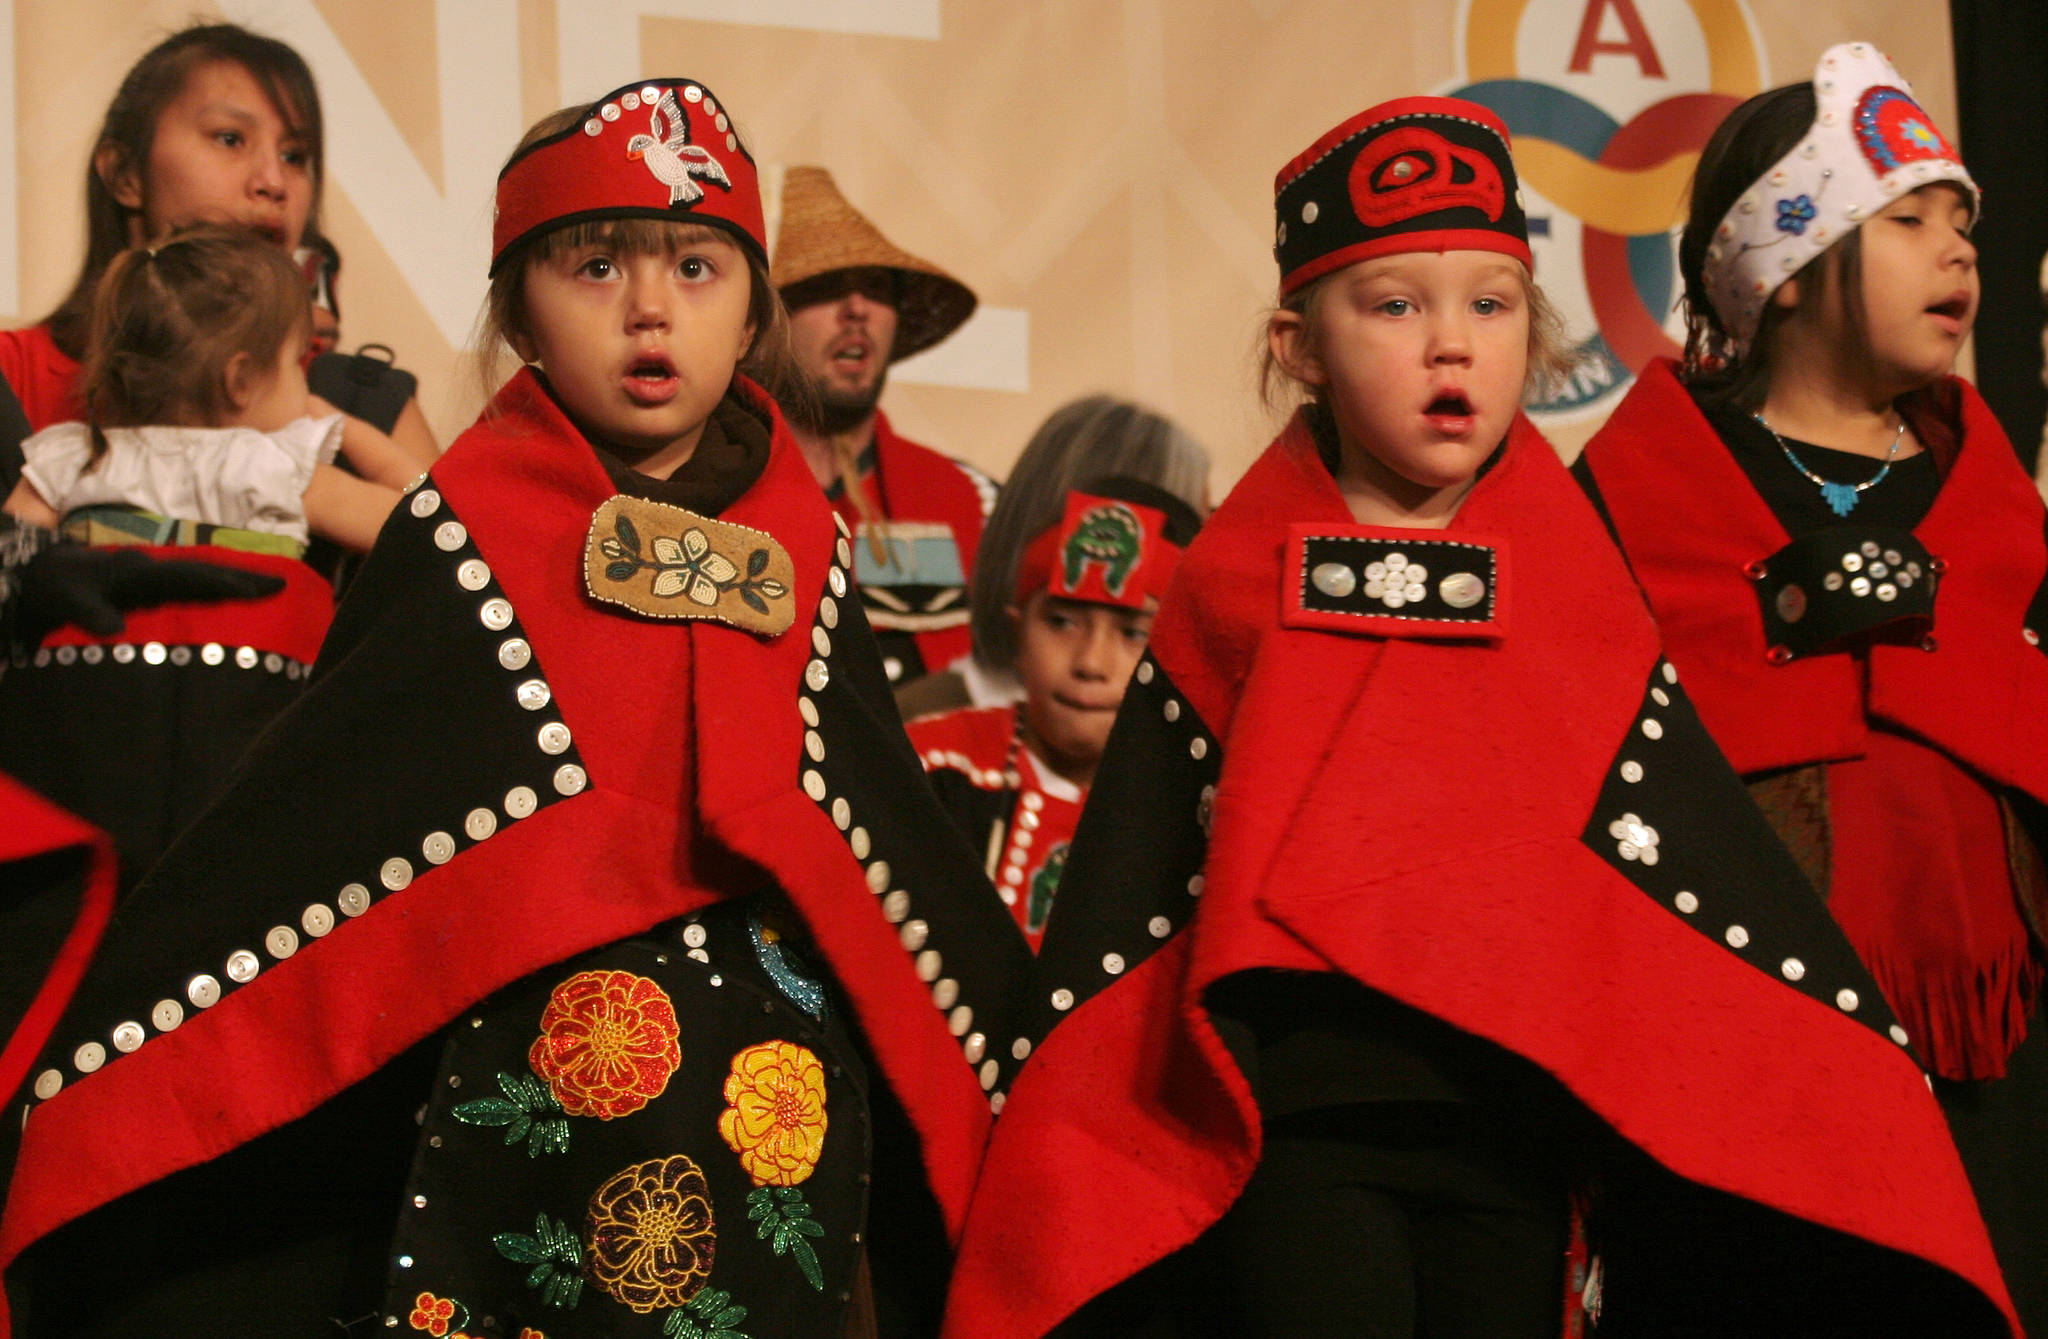 The Yees Ku Oo’, Woosh.ji.een and All Nation’s Children dance groups from Juneau perform on the closing day of the Alaska Federation of Natives Annual Convention in this October 2014 photo. (Michael Penn | Juneau Empire File)